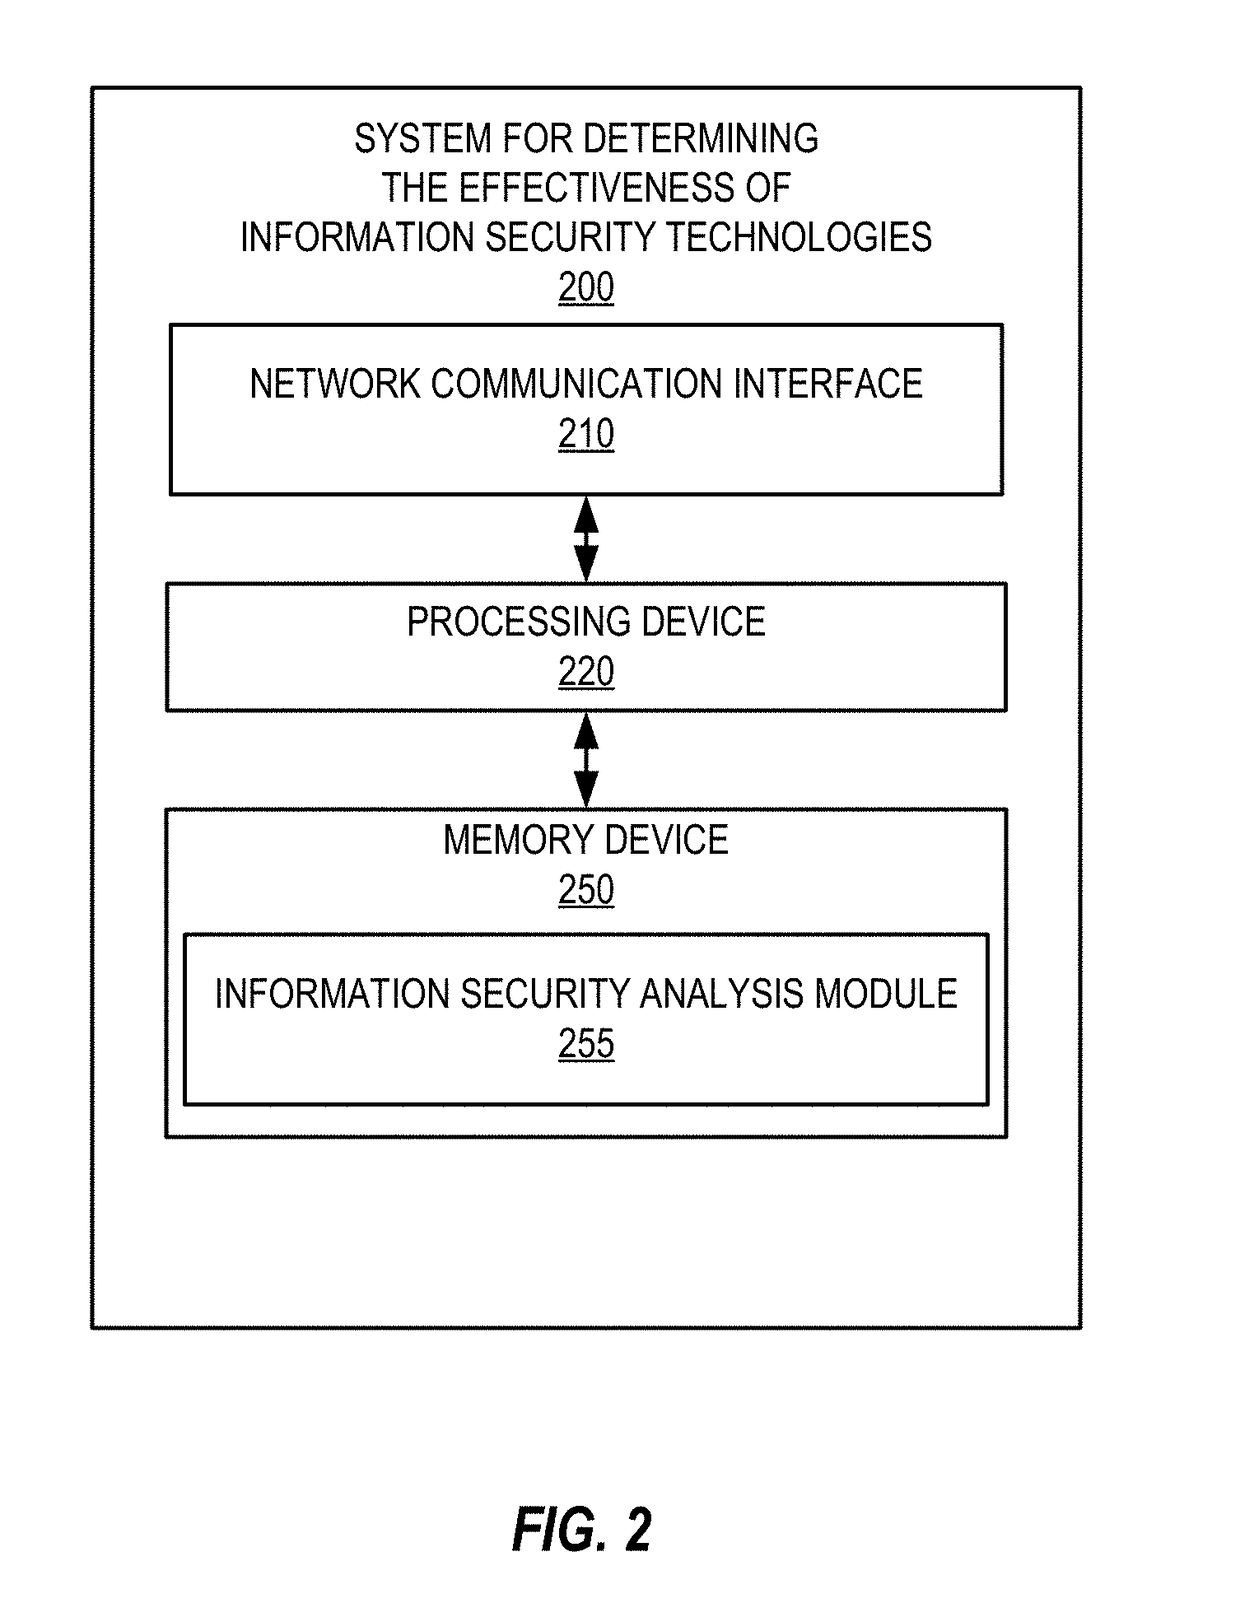 System for determining effectiveness and allocation of information security technologies